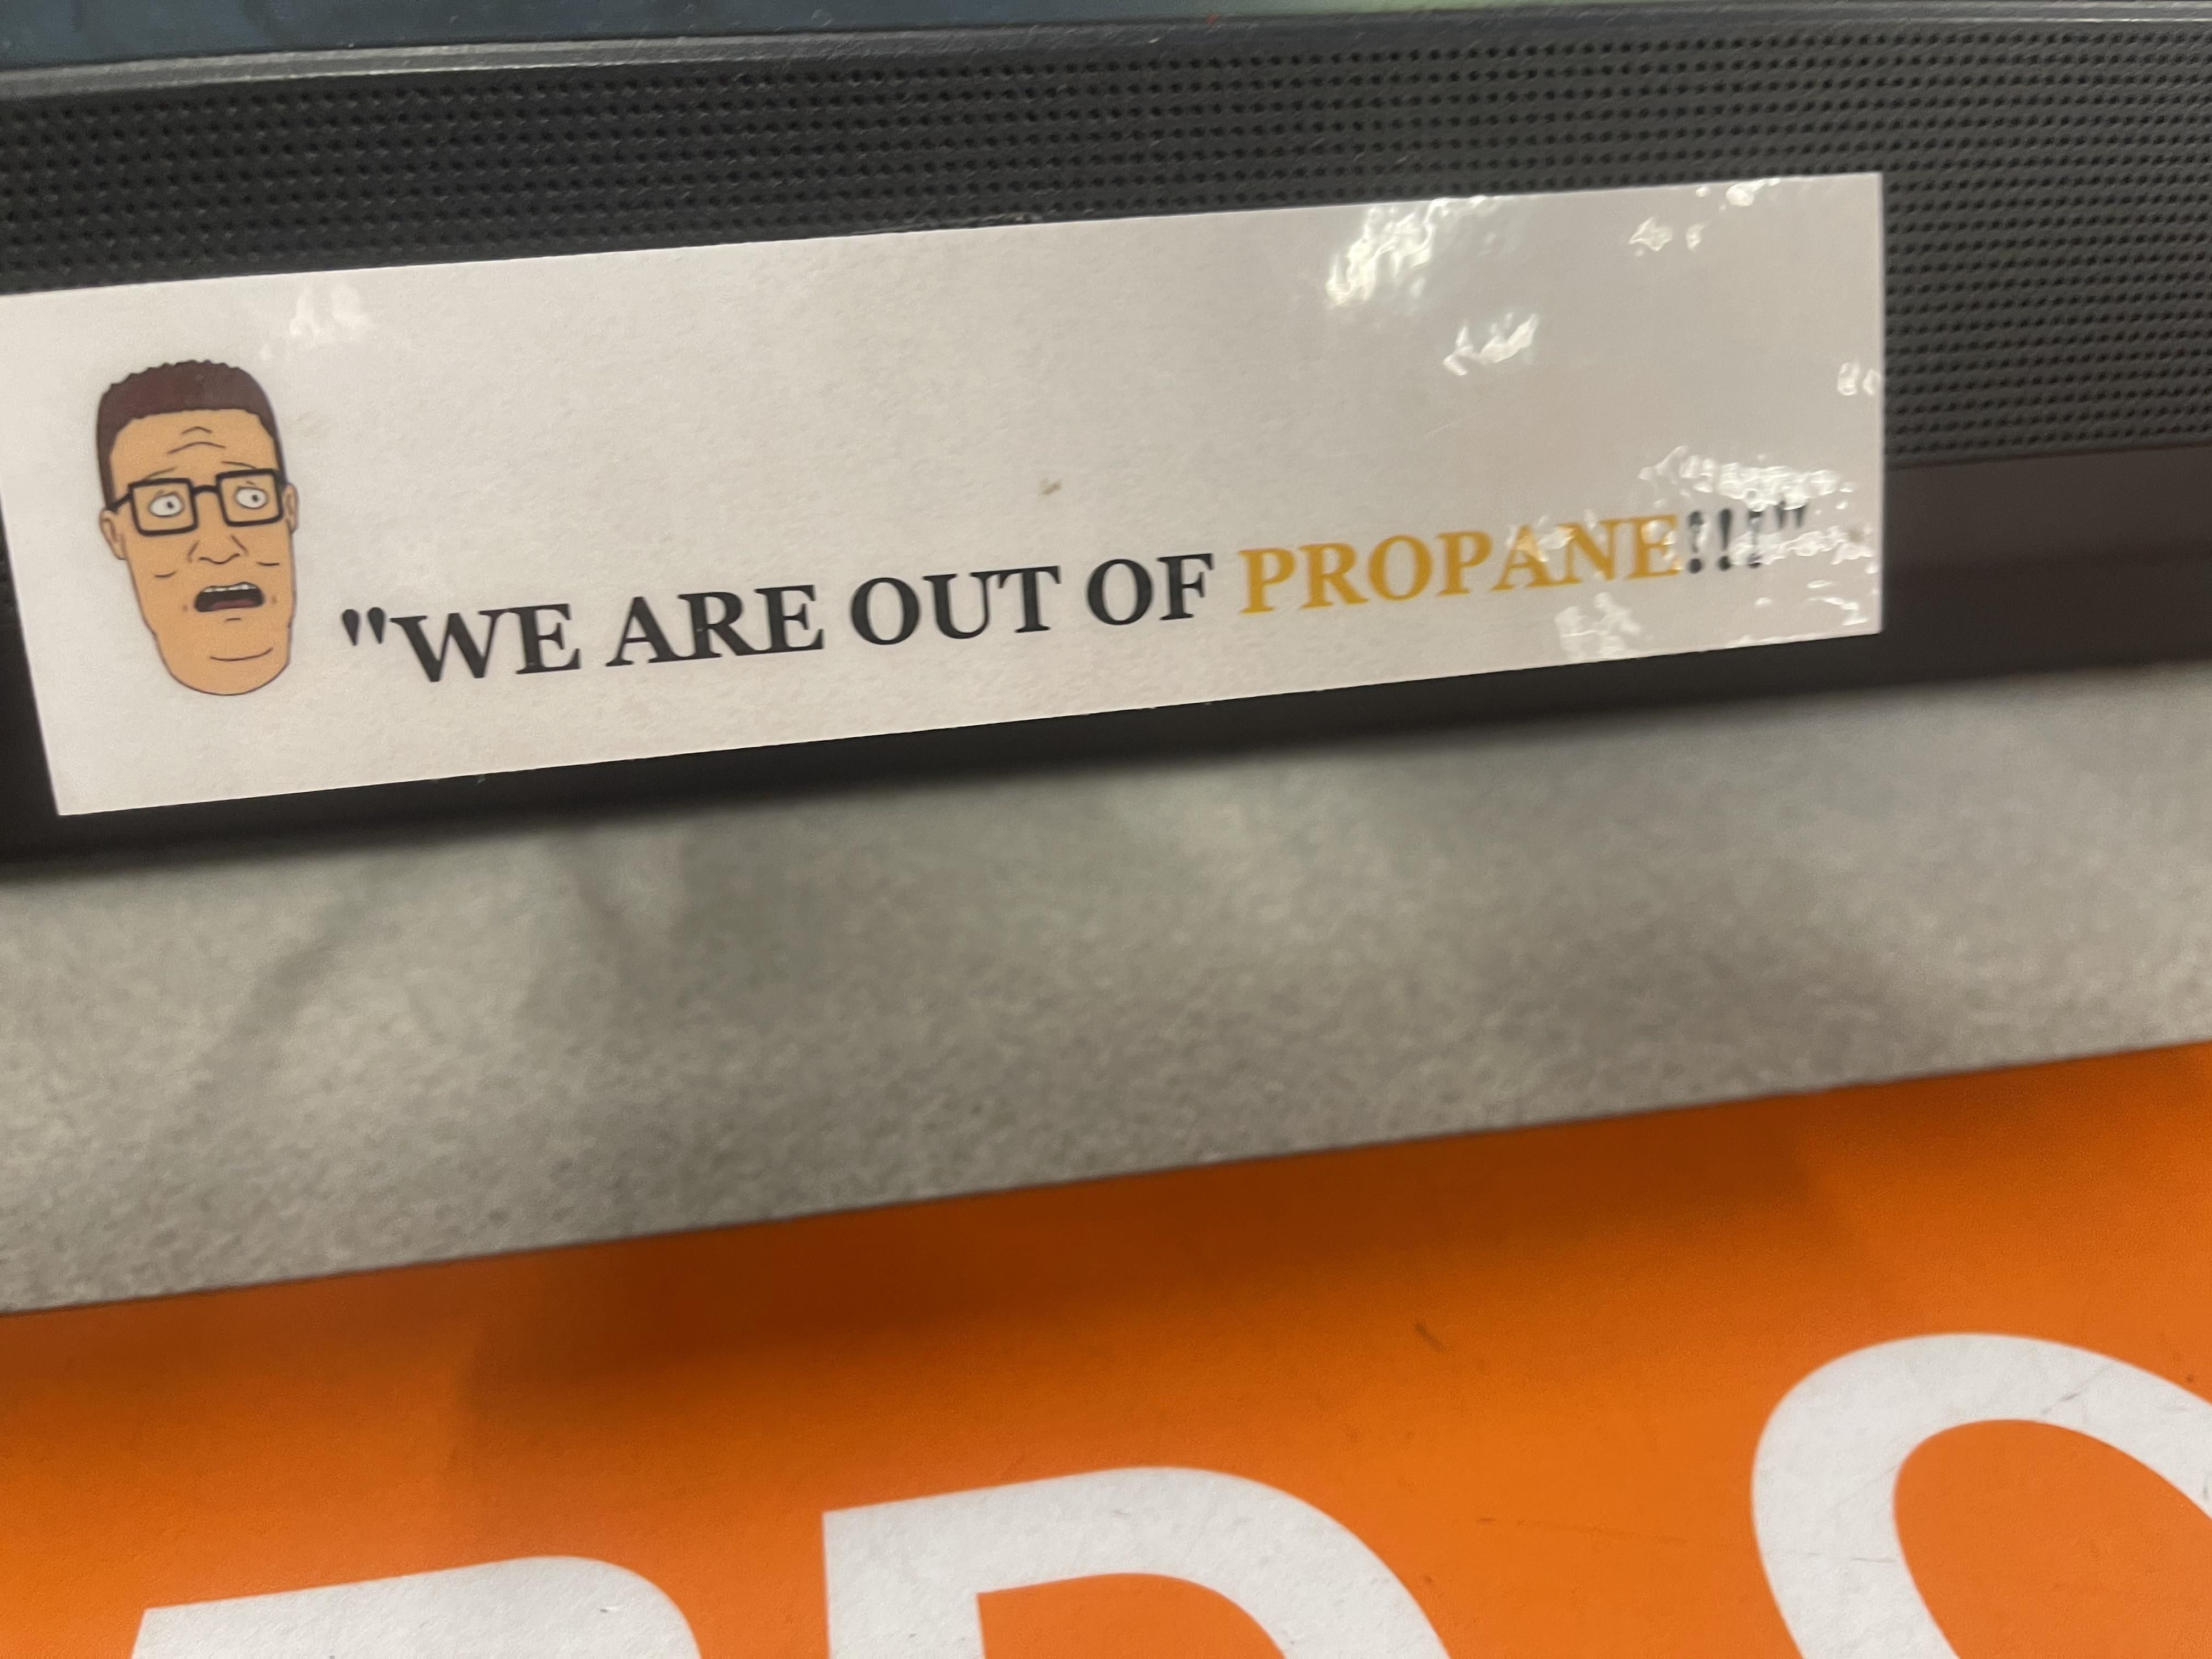 Found this sign at Home Depot.